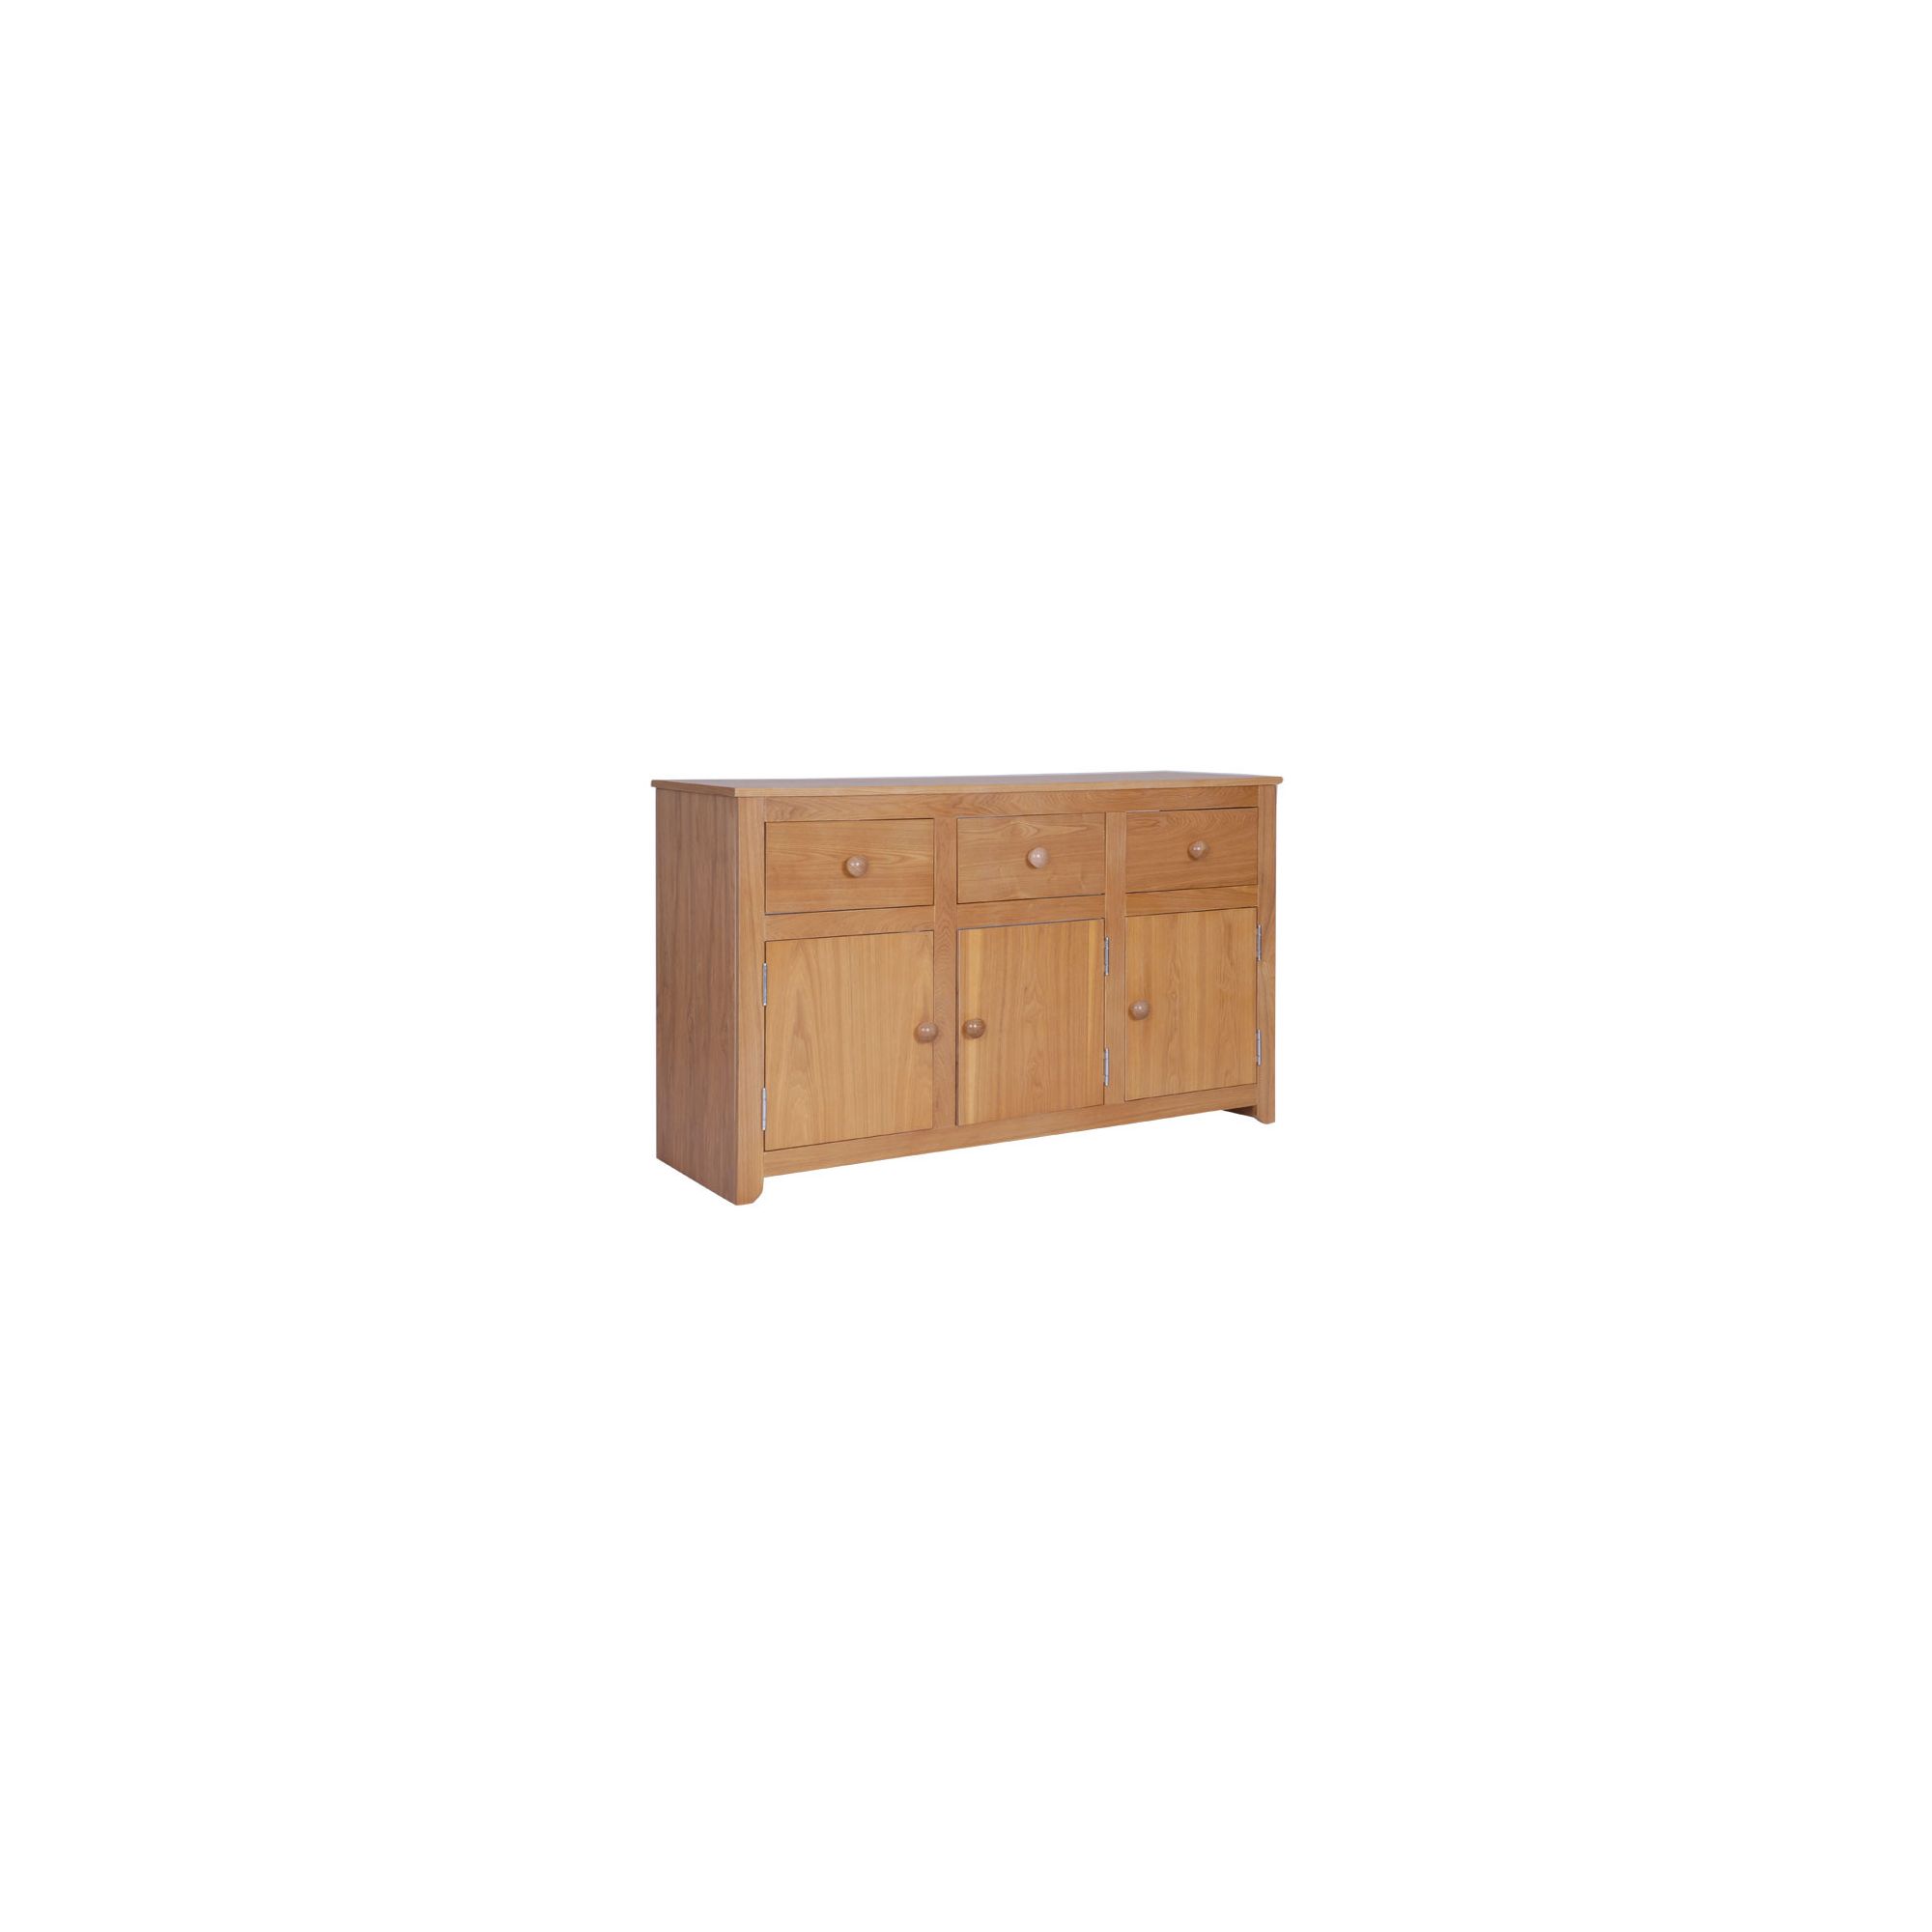 Home Essence Traditional 3 Door 3 Drawer Sideboard at Tesco Direct